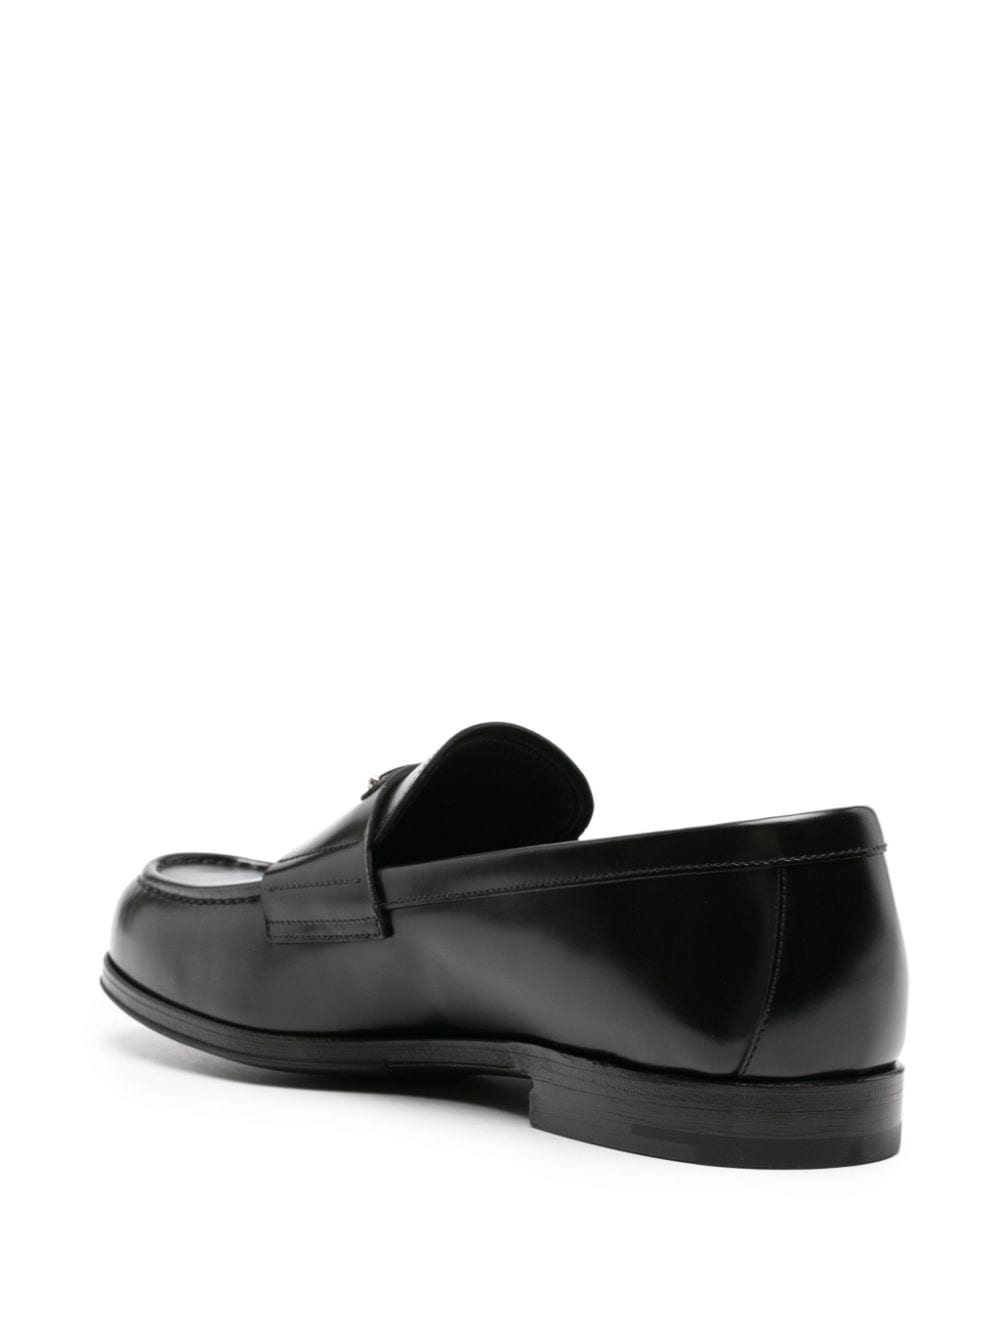 Enamel-triangle leather loafers<BR/><BR/>